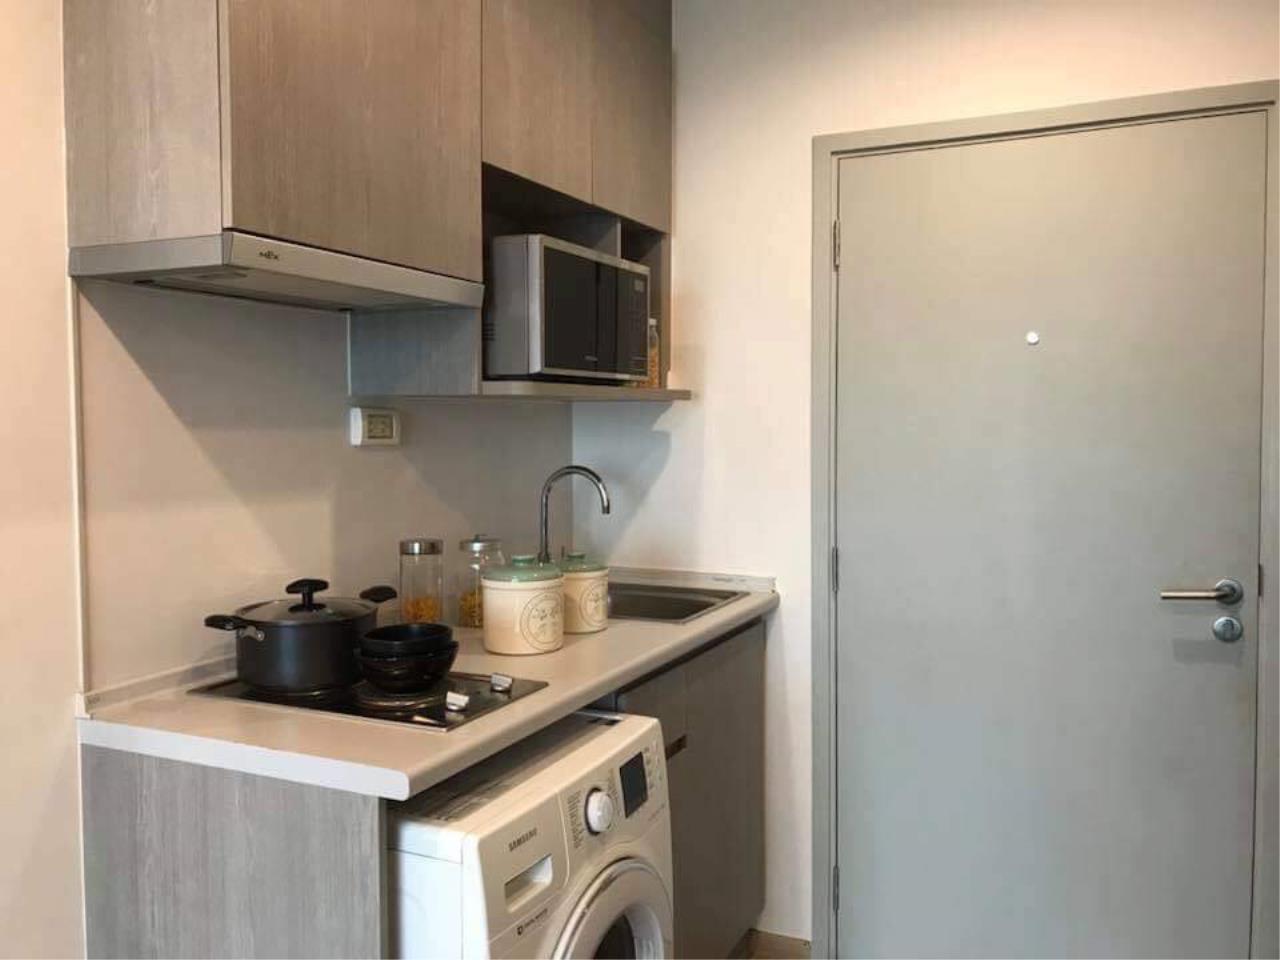 Agent -  Marwin Agency's Condo for rent near BTS Pho Nimit, IDEO Sathorn-Thapra Condo 1 bedroom 1 bathroom on 24th floor size 30 sqm. south view 11